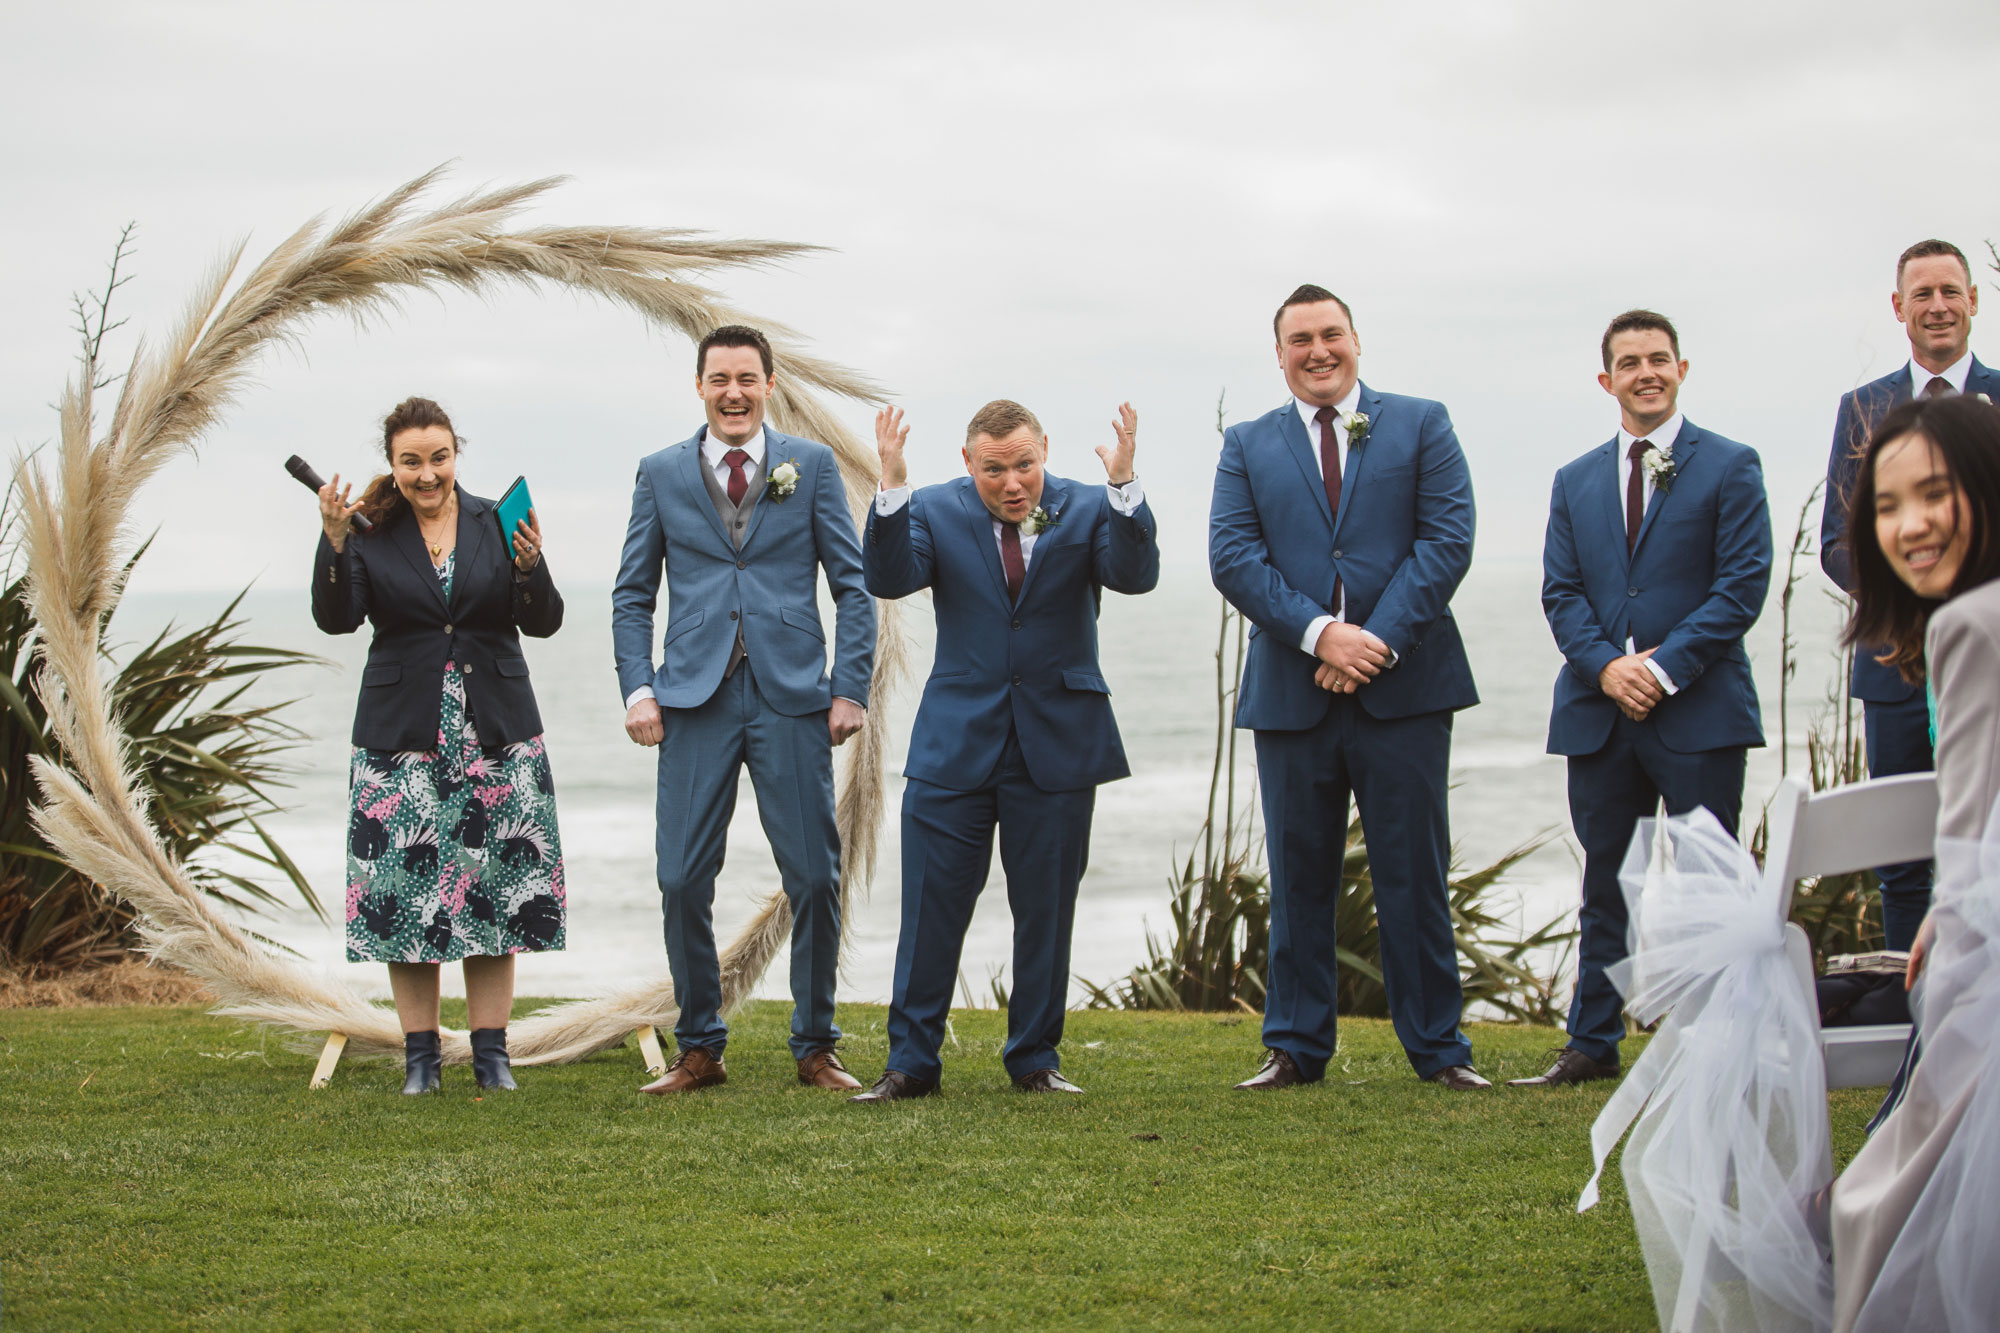 groomsmen laughing together